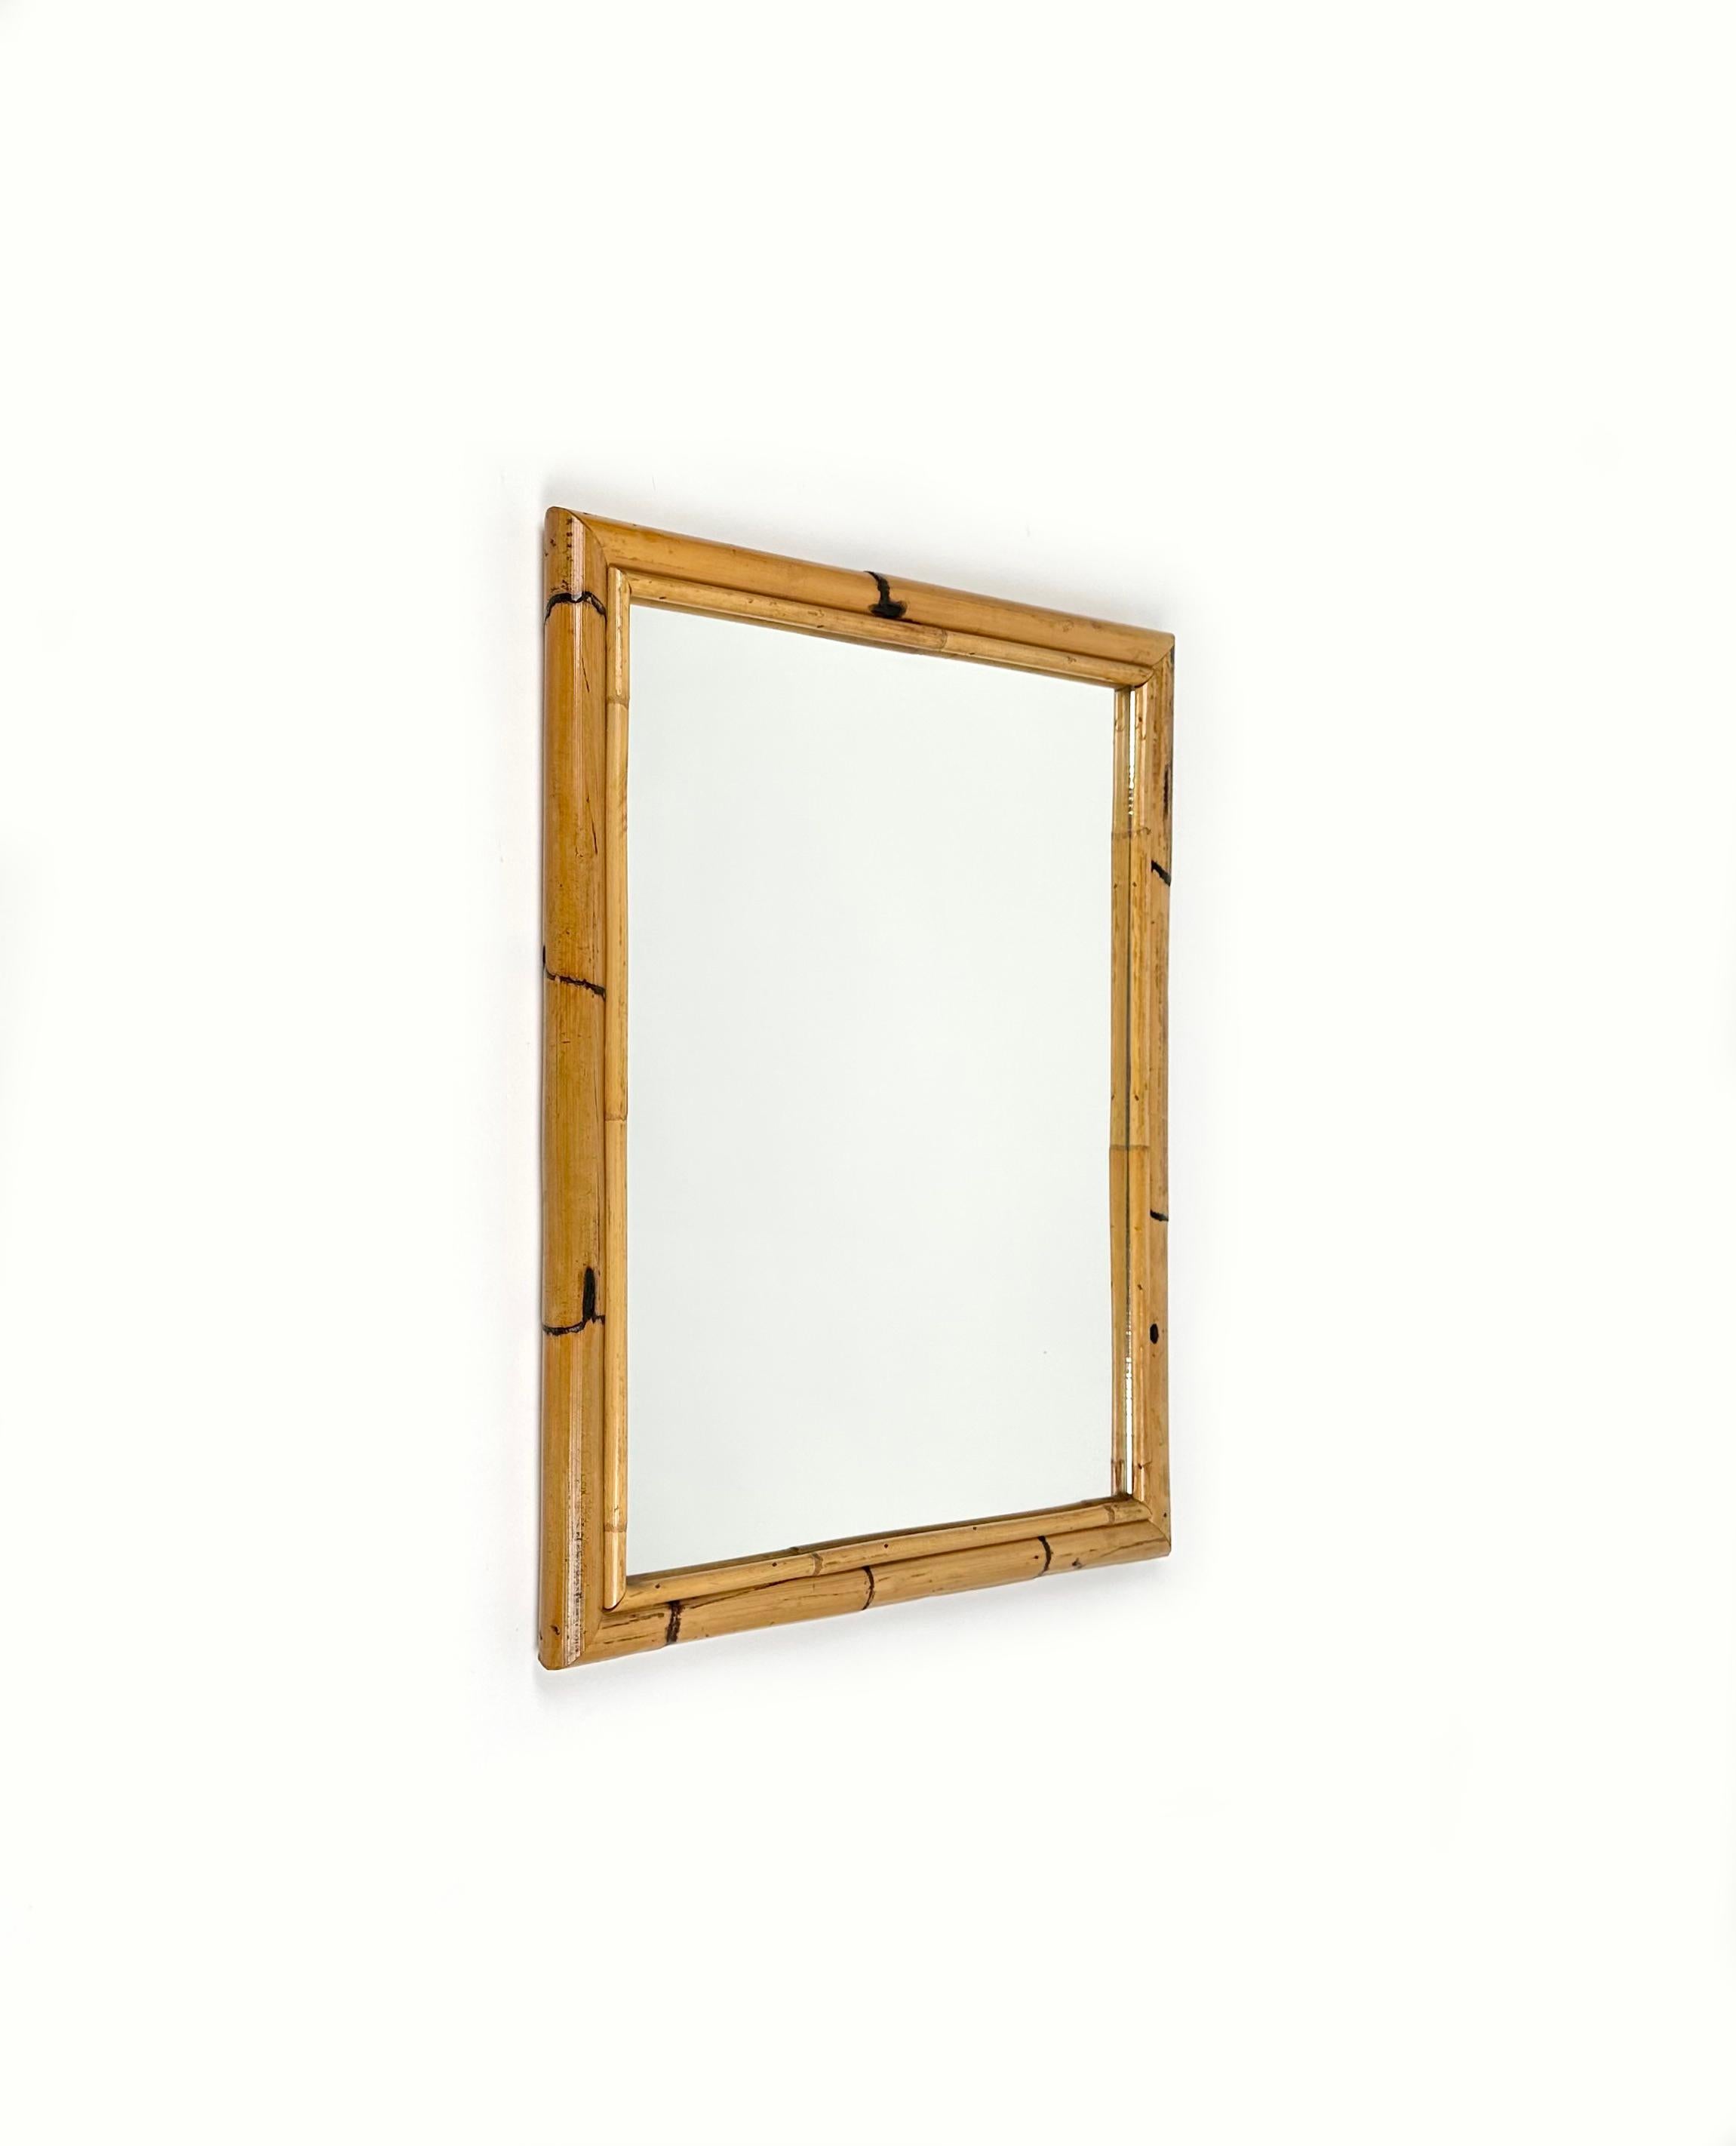 Mid-Century Modern Midcentury Rectangular Wall Mirror Double Bamboo Frame, Italy 1970s For Sale